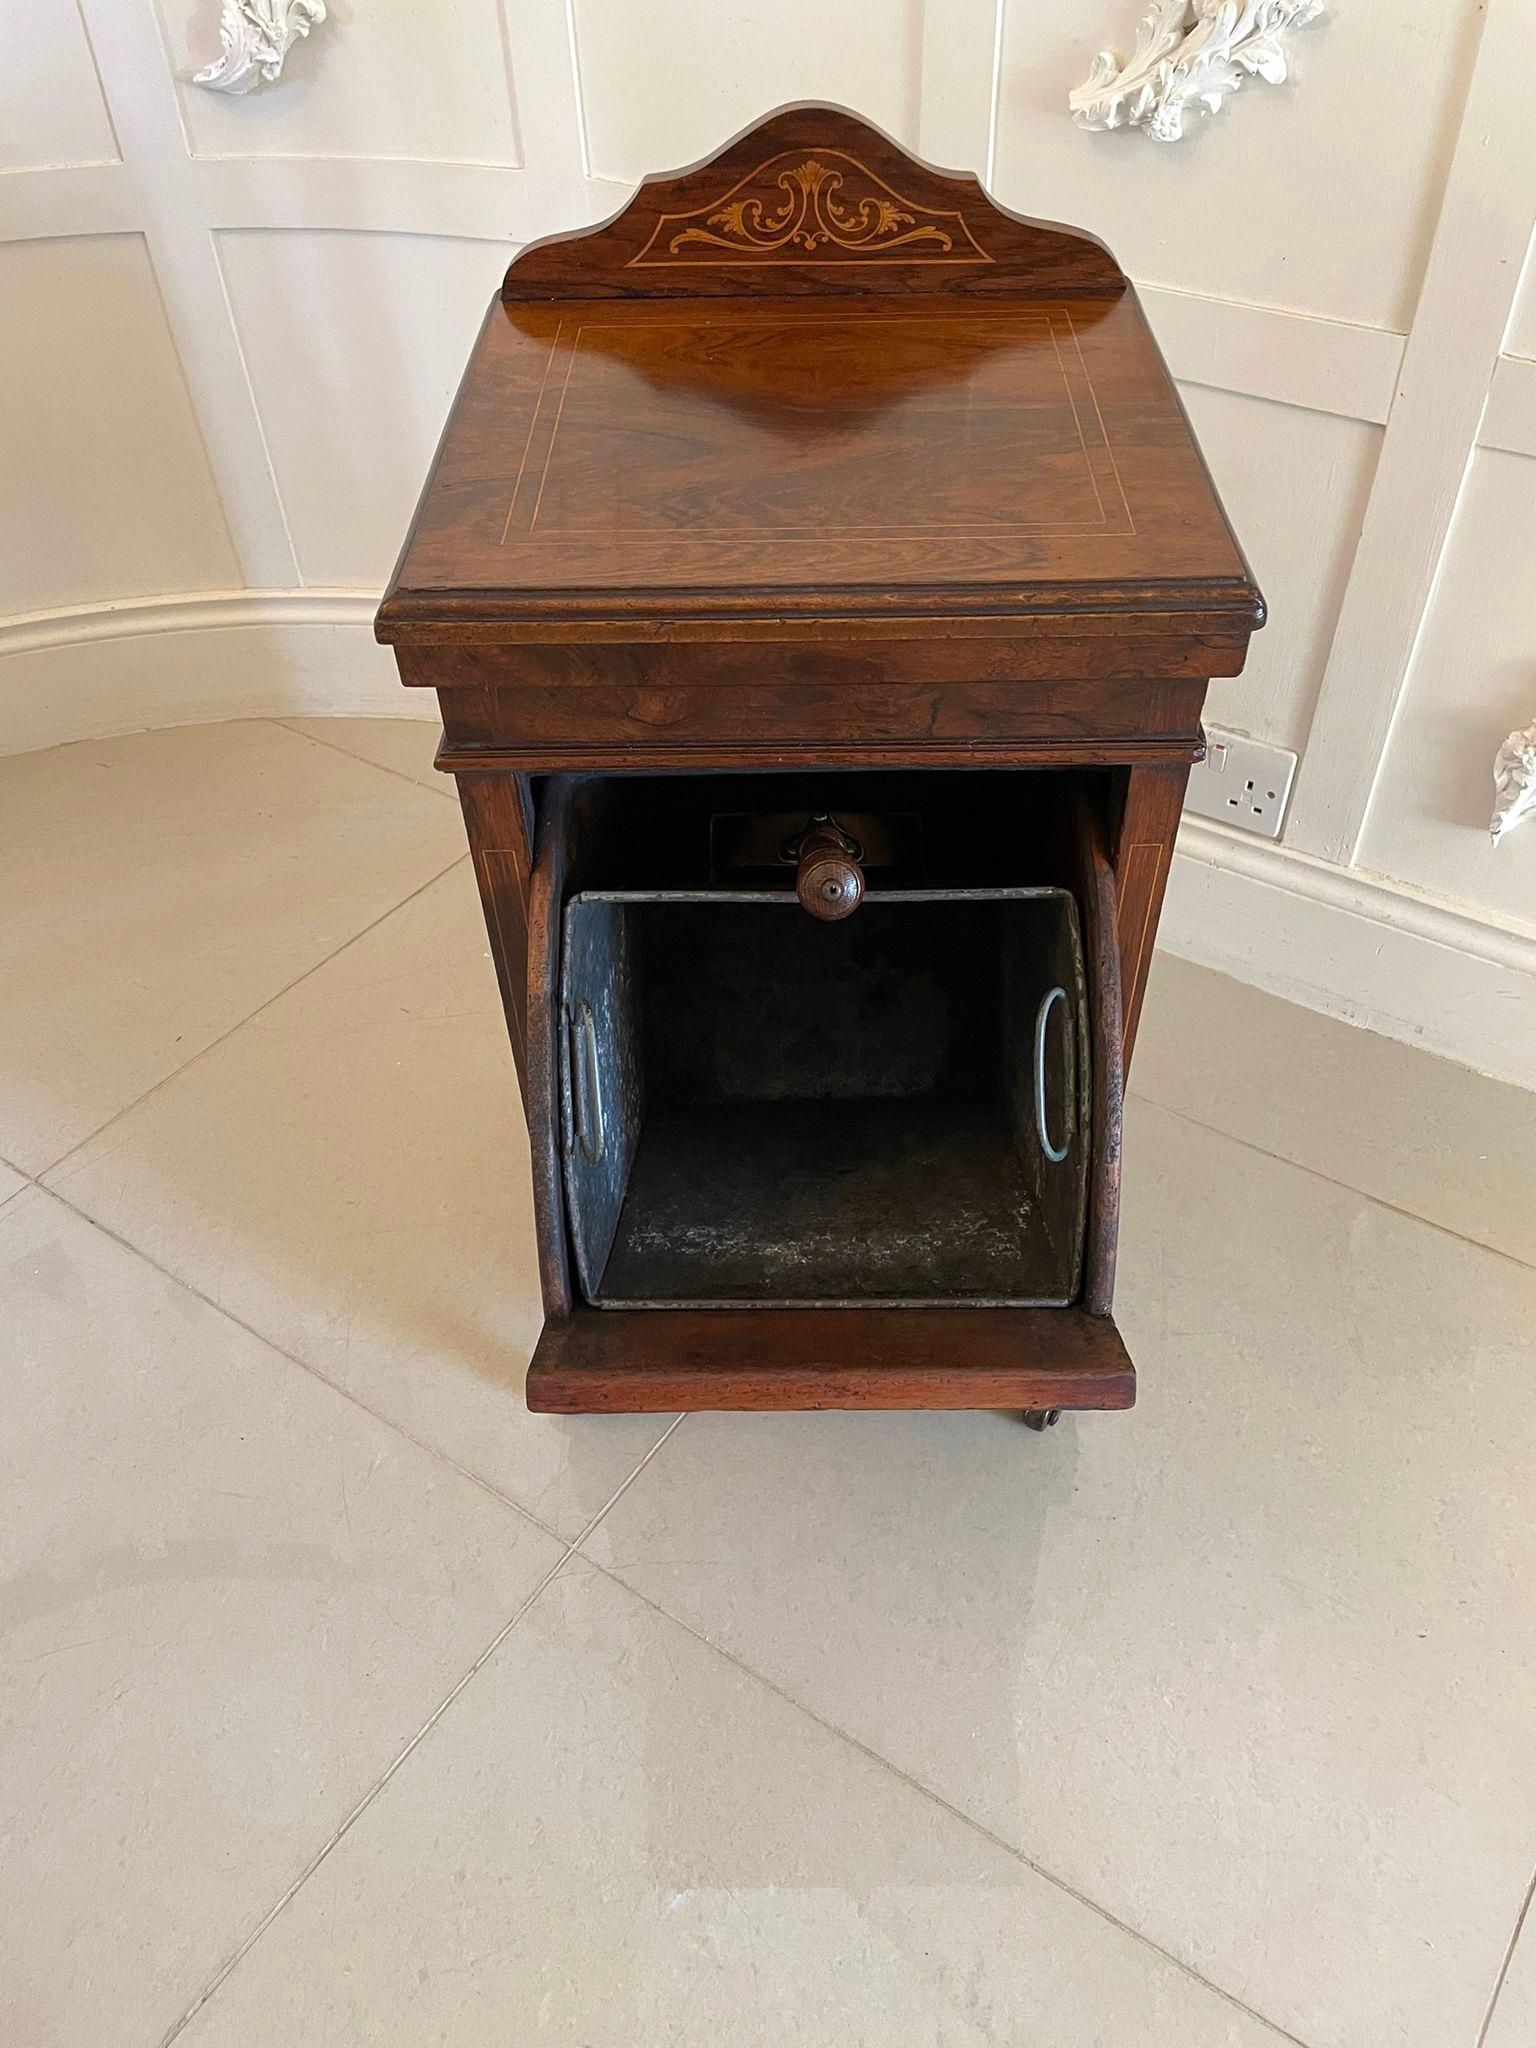 Antique Edwardian freestanding quality rosewood inlaid coal cabinet having a quality shaped inlaid gallery back, pretty rosewood inlaid top with a moulded edge above a pull down front with a superb inlaid panel and original brass handle opening to